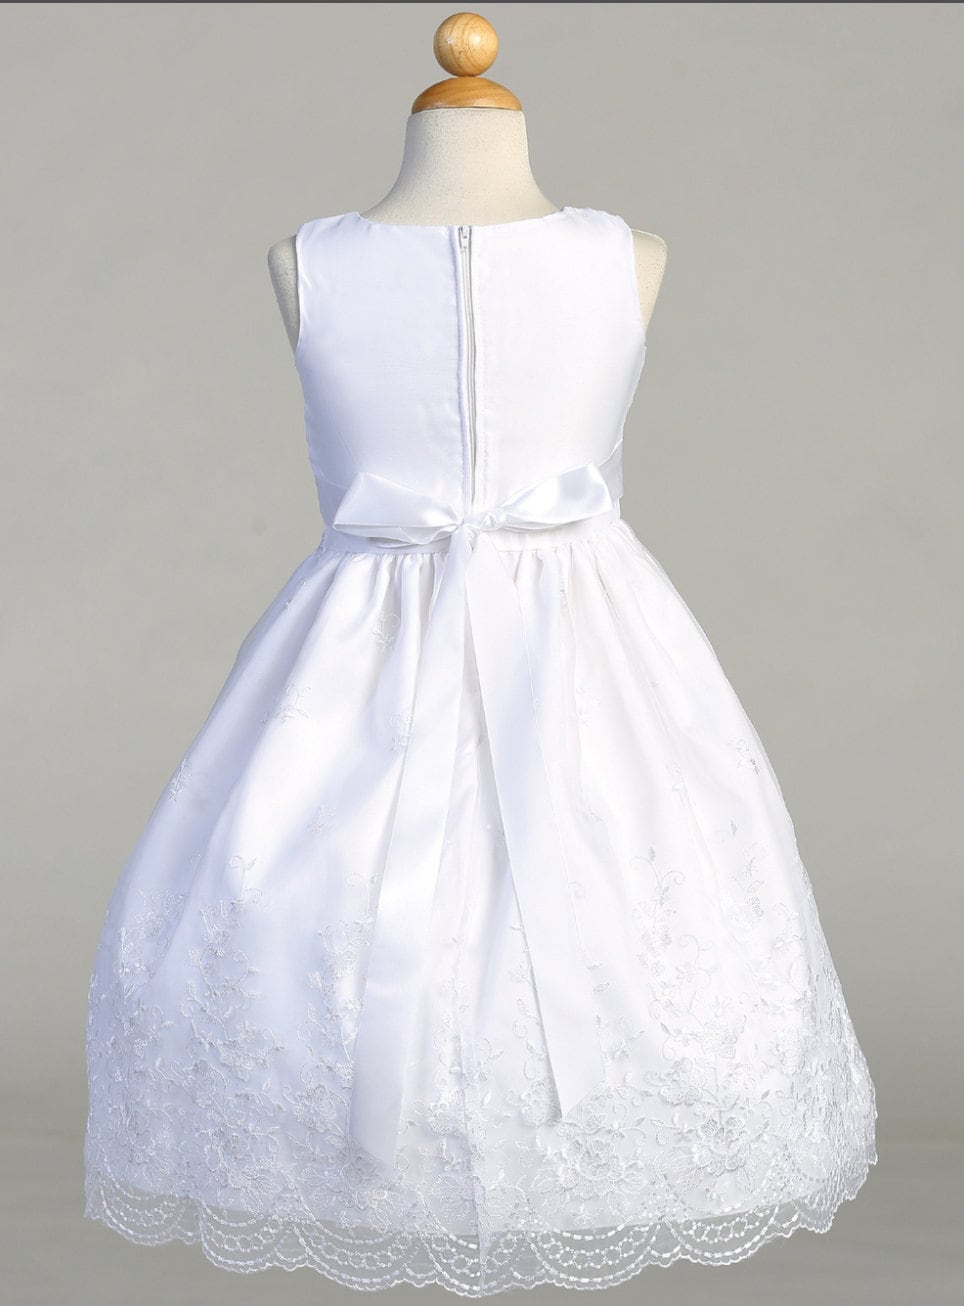 Back view of the First Communion Dress showing the zip fastening and bow tie.